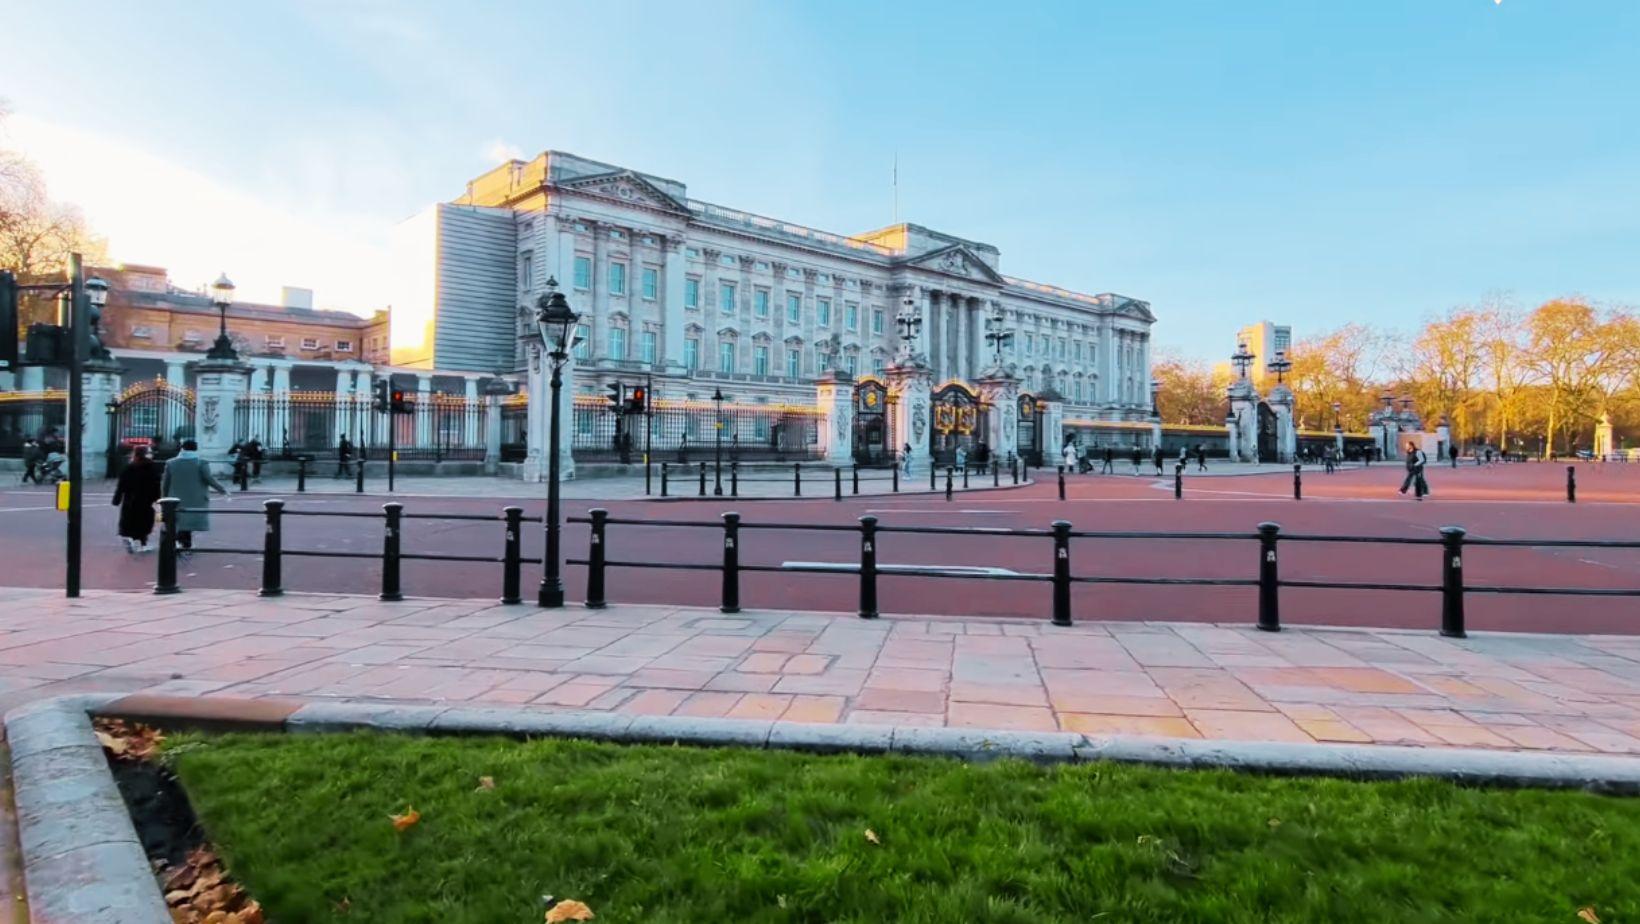 Buckingham Palace Tour, London: Tickets and Activities!